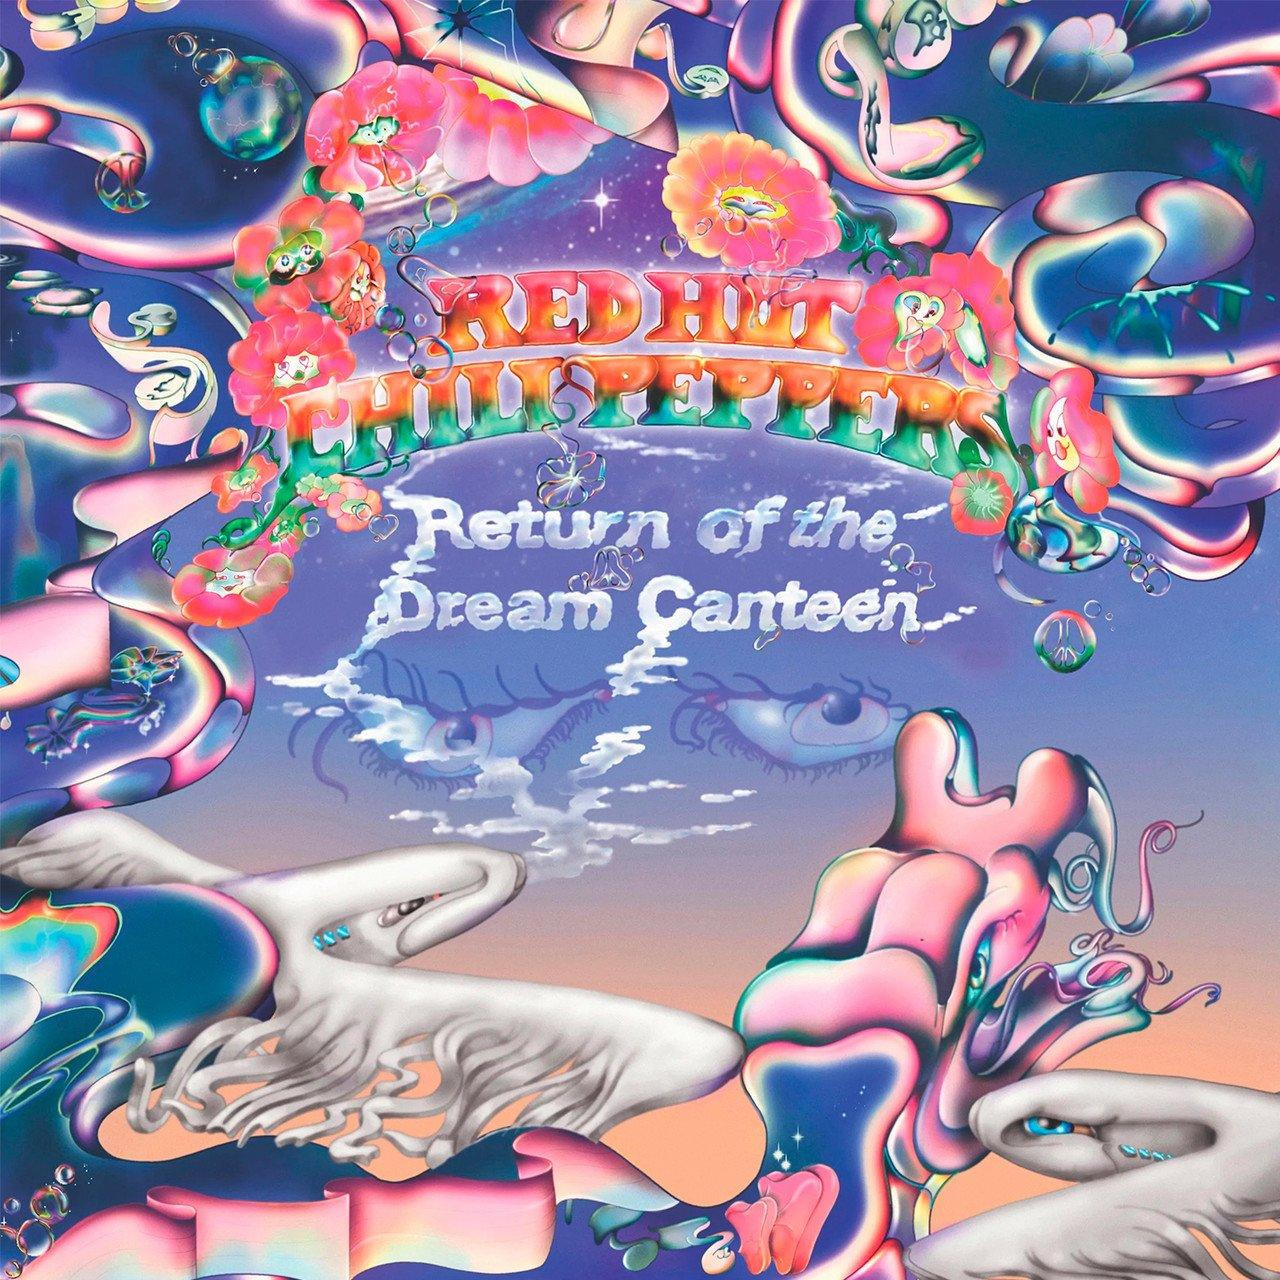 Рок Warner Music Red Hot Chili Peppers - Return Of The Dream Canteen (Pink Vinyl 2LP) red hot chili peppers at pat o brien pavilion del mar red vinyl